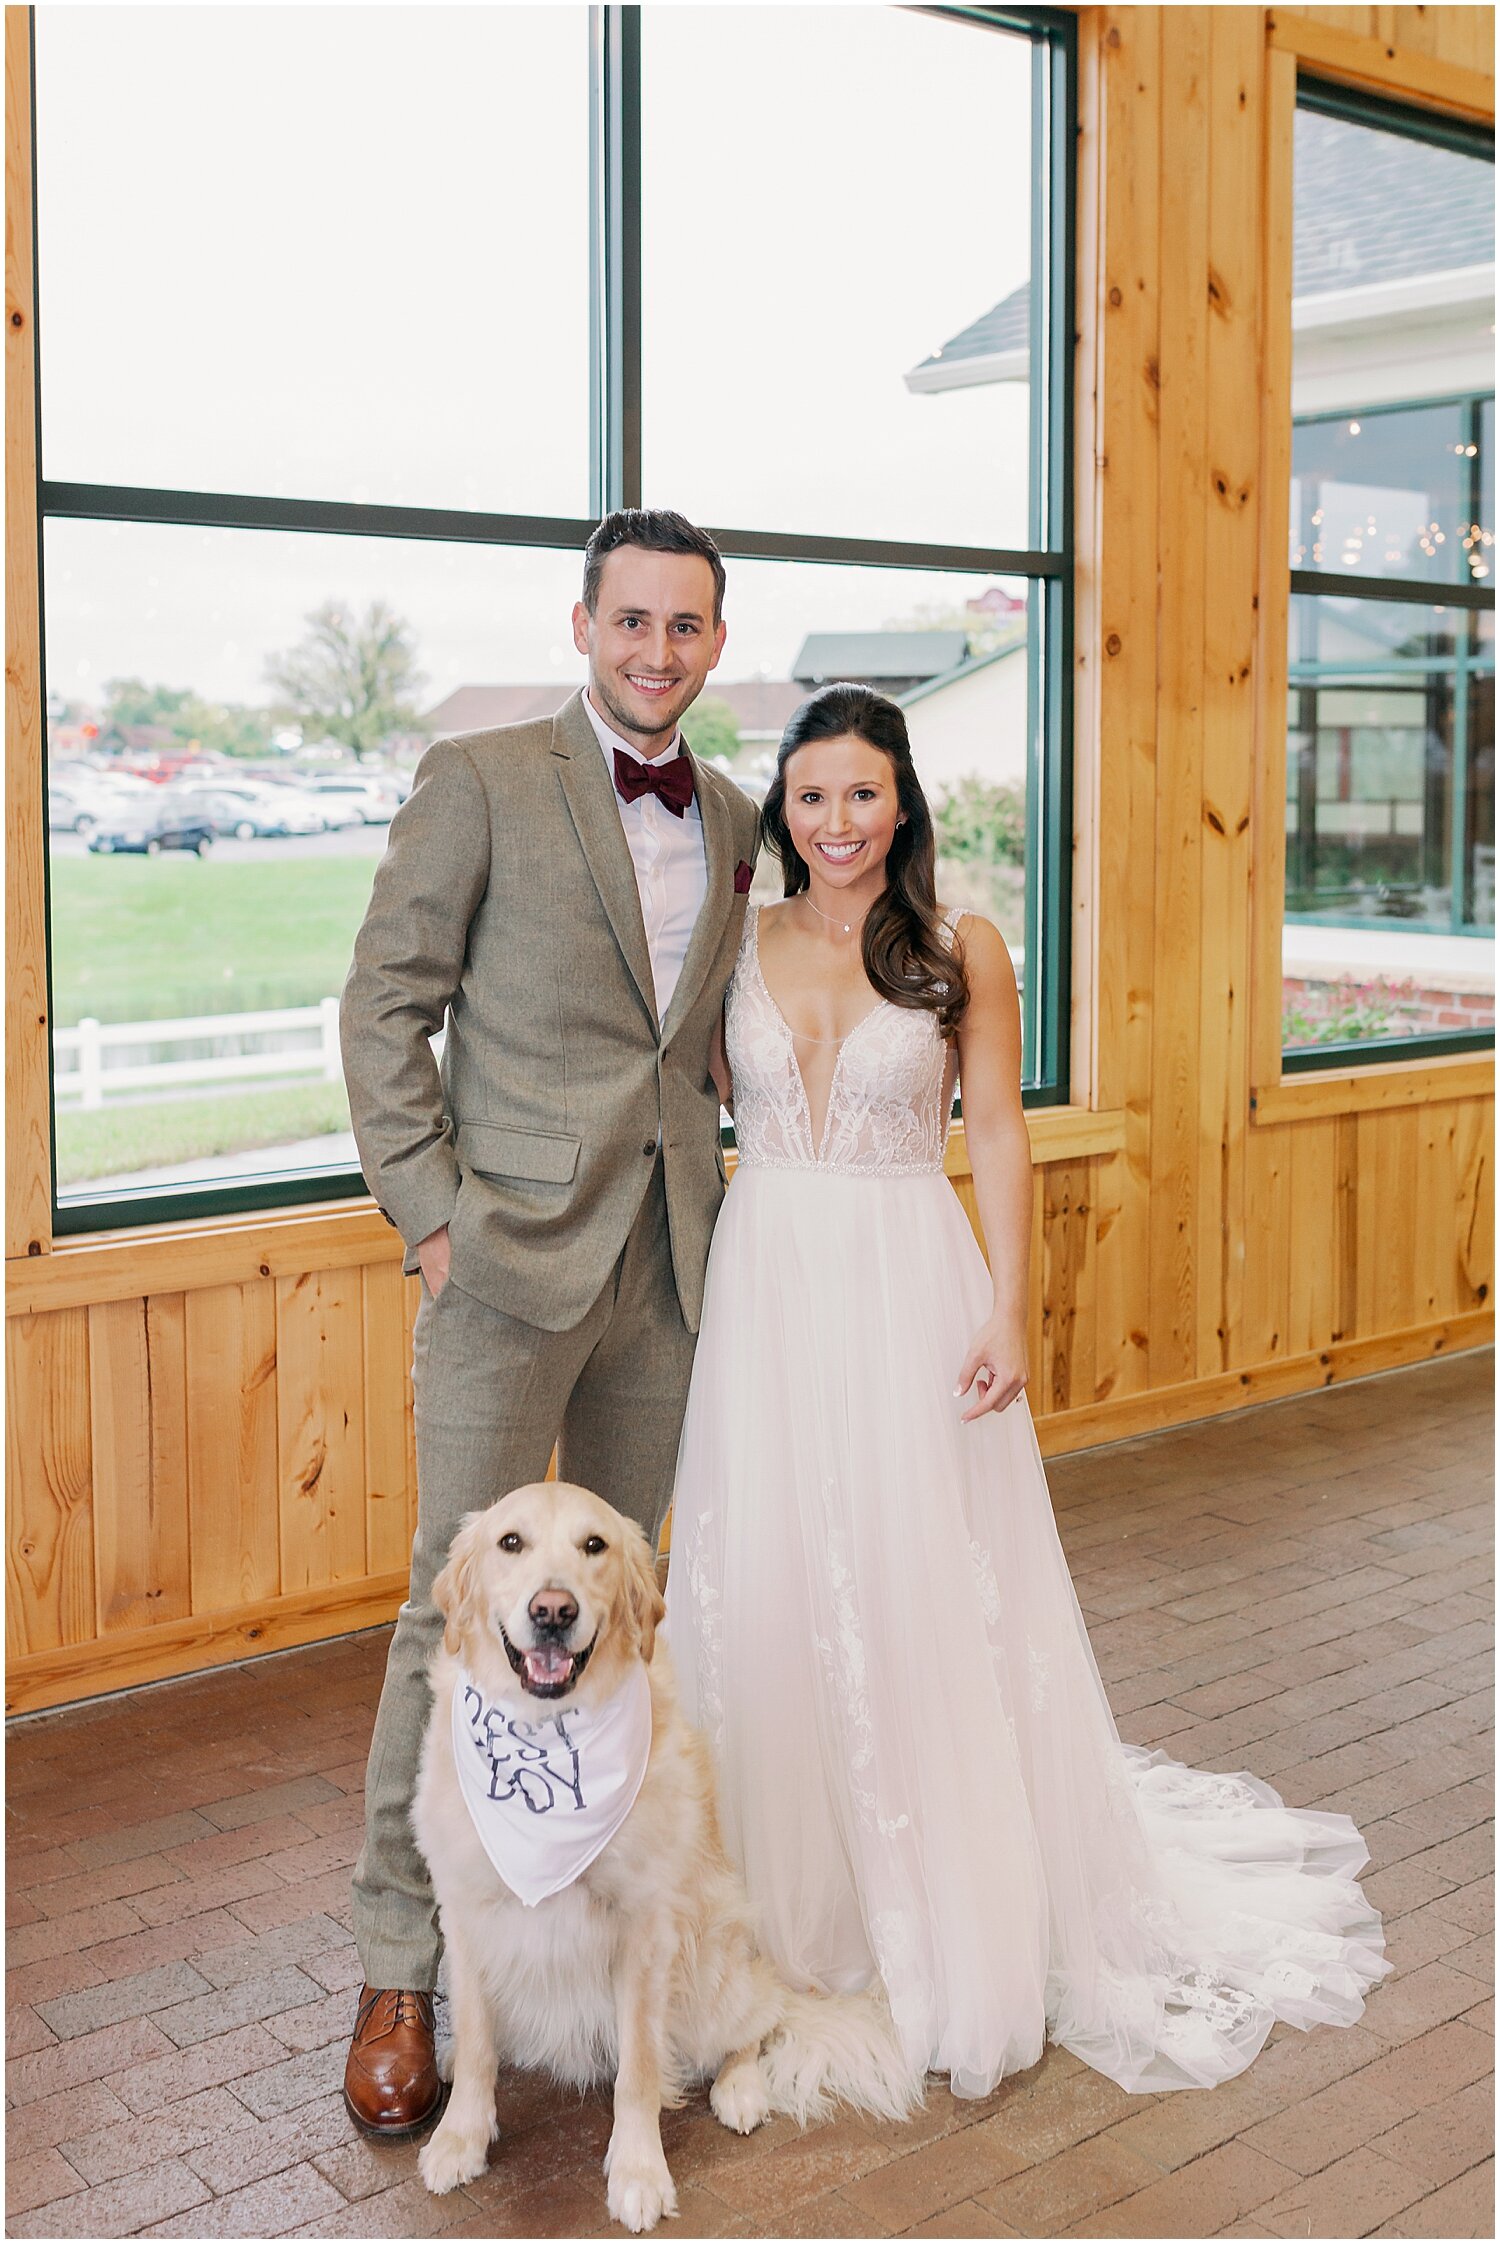  bride and groom with their dog at the wedding 